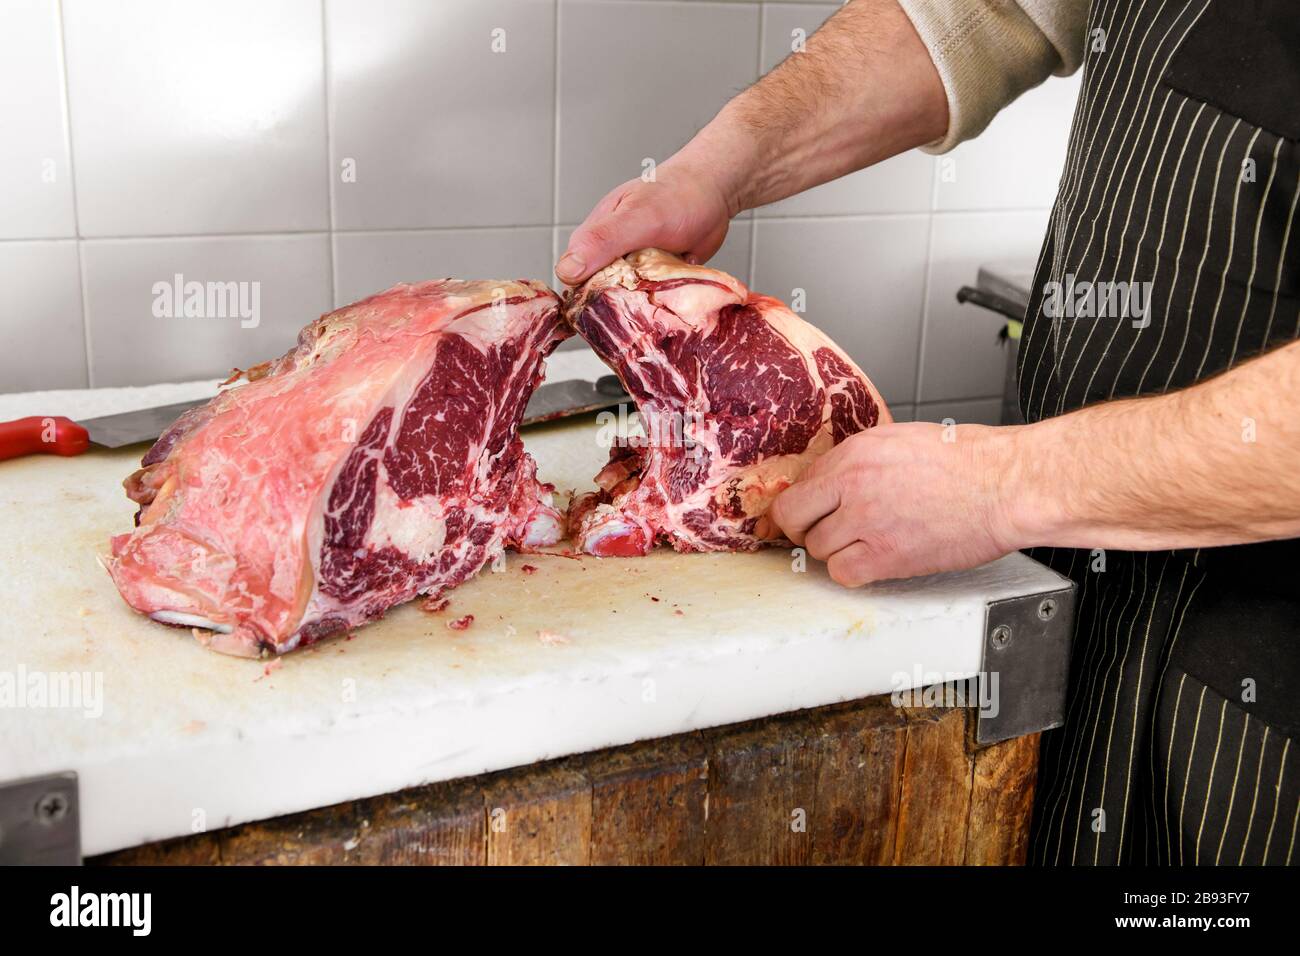 Butcher showing pieces of raw rib eye ham meat on cutting board Stock Photo